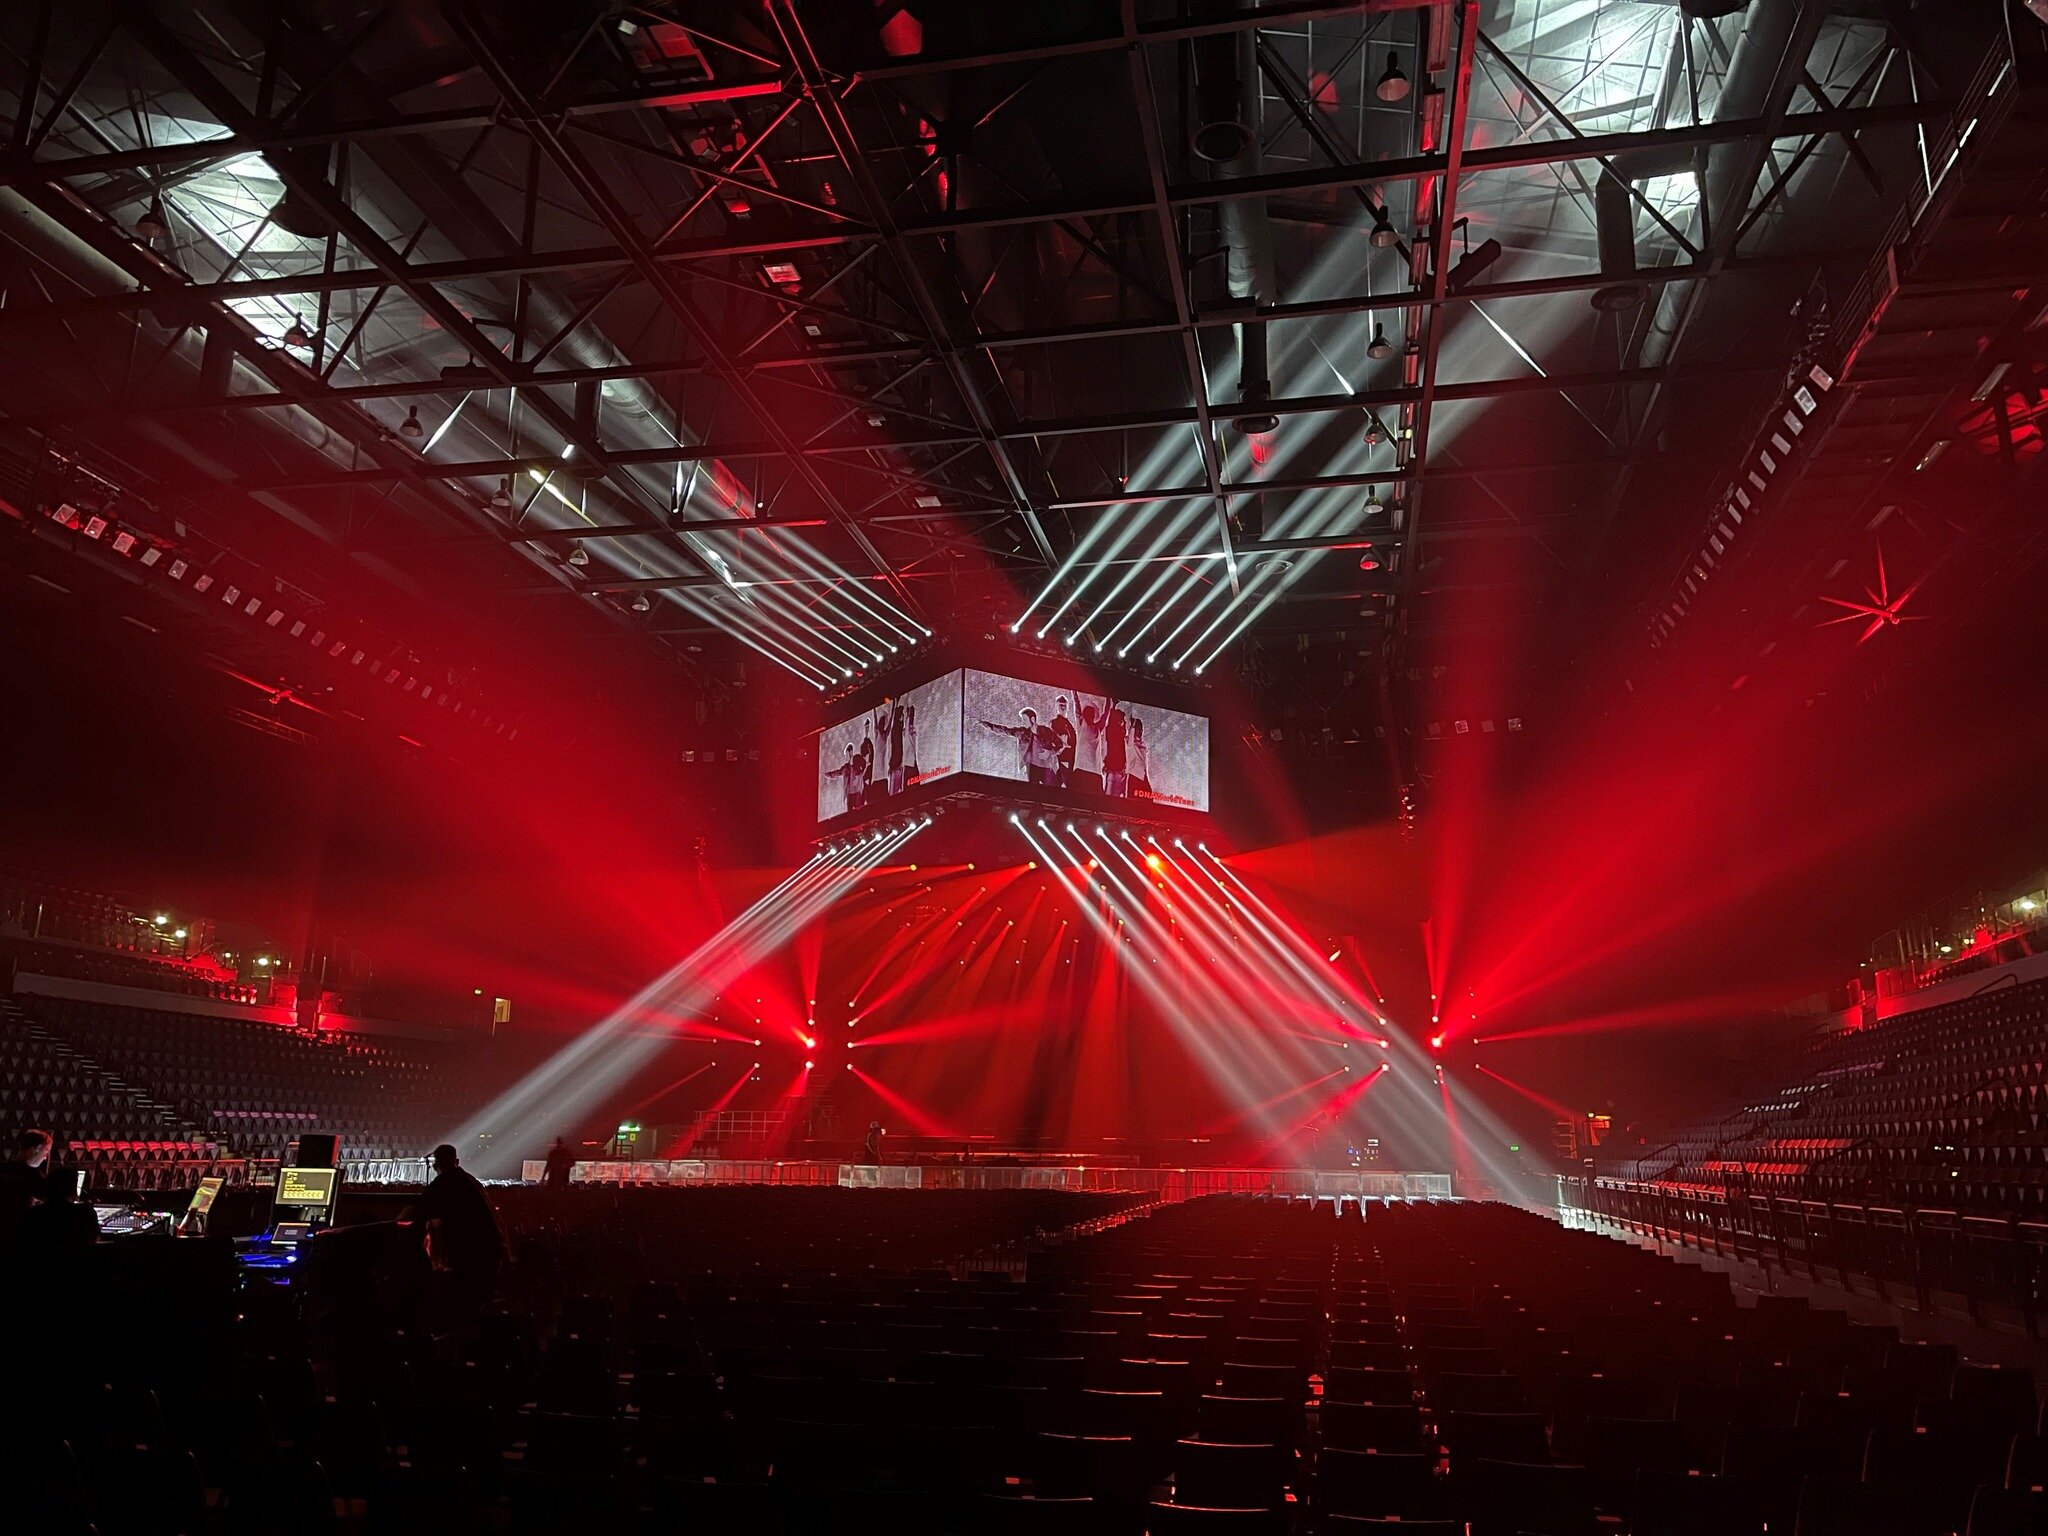 || Backstreet Boys 2023 ||

Oceania were proud to have delivered all things technical for the Backstreet Boys show the other week @ Spark Arena . We delivered the audio, lighting and vision on this one to an absolutely packed Arena.
The NZ Herald sum